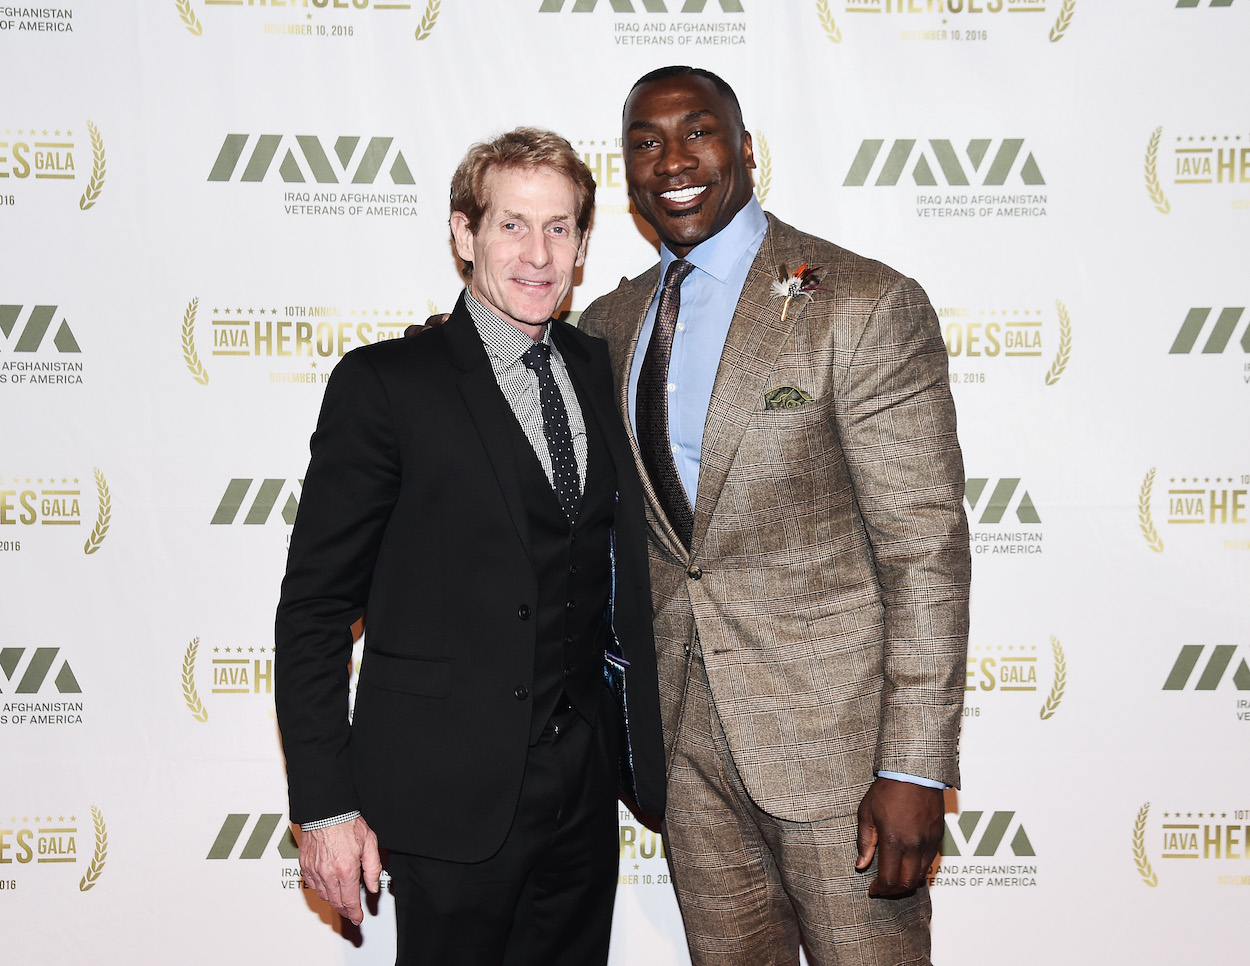 TV sports commentators Skip Bayless (L) and Shannon Sharpe attends the 2016 IAVA Heroes Gala at Cipriani 42nd Street on November 10, 2016 in New York City.